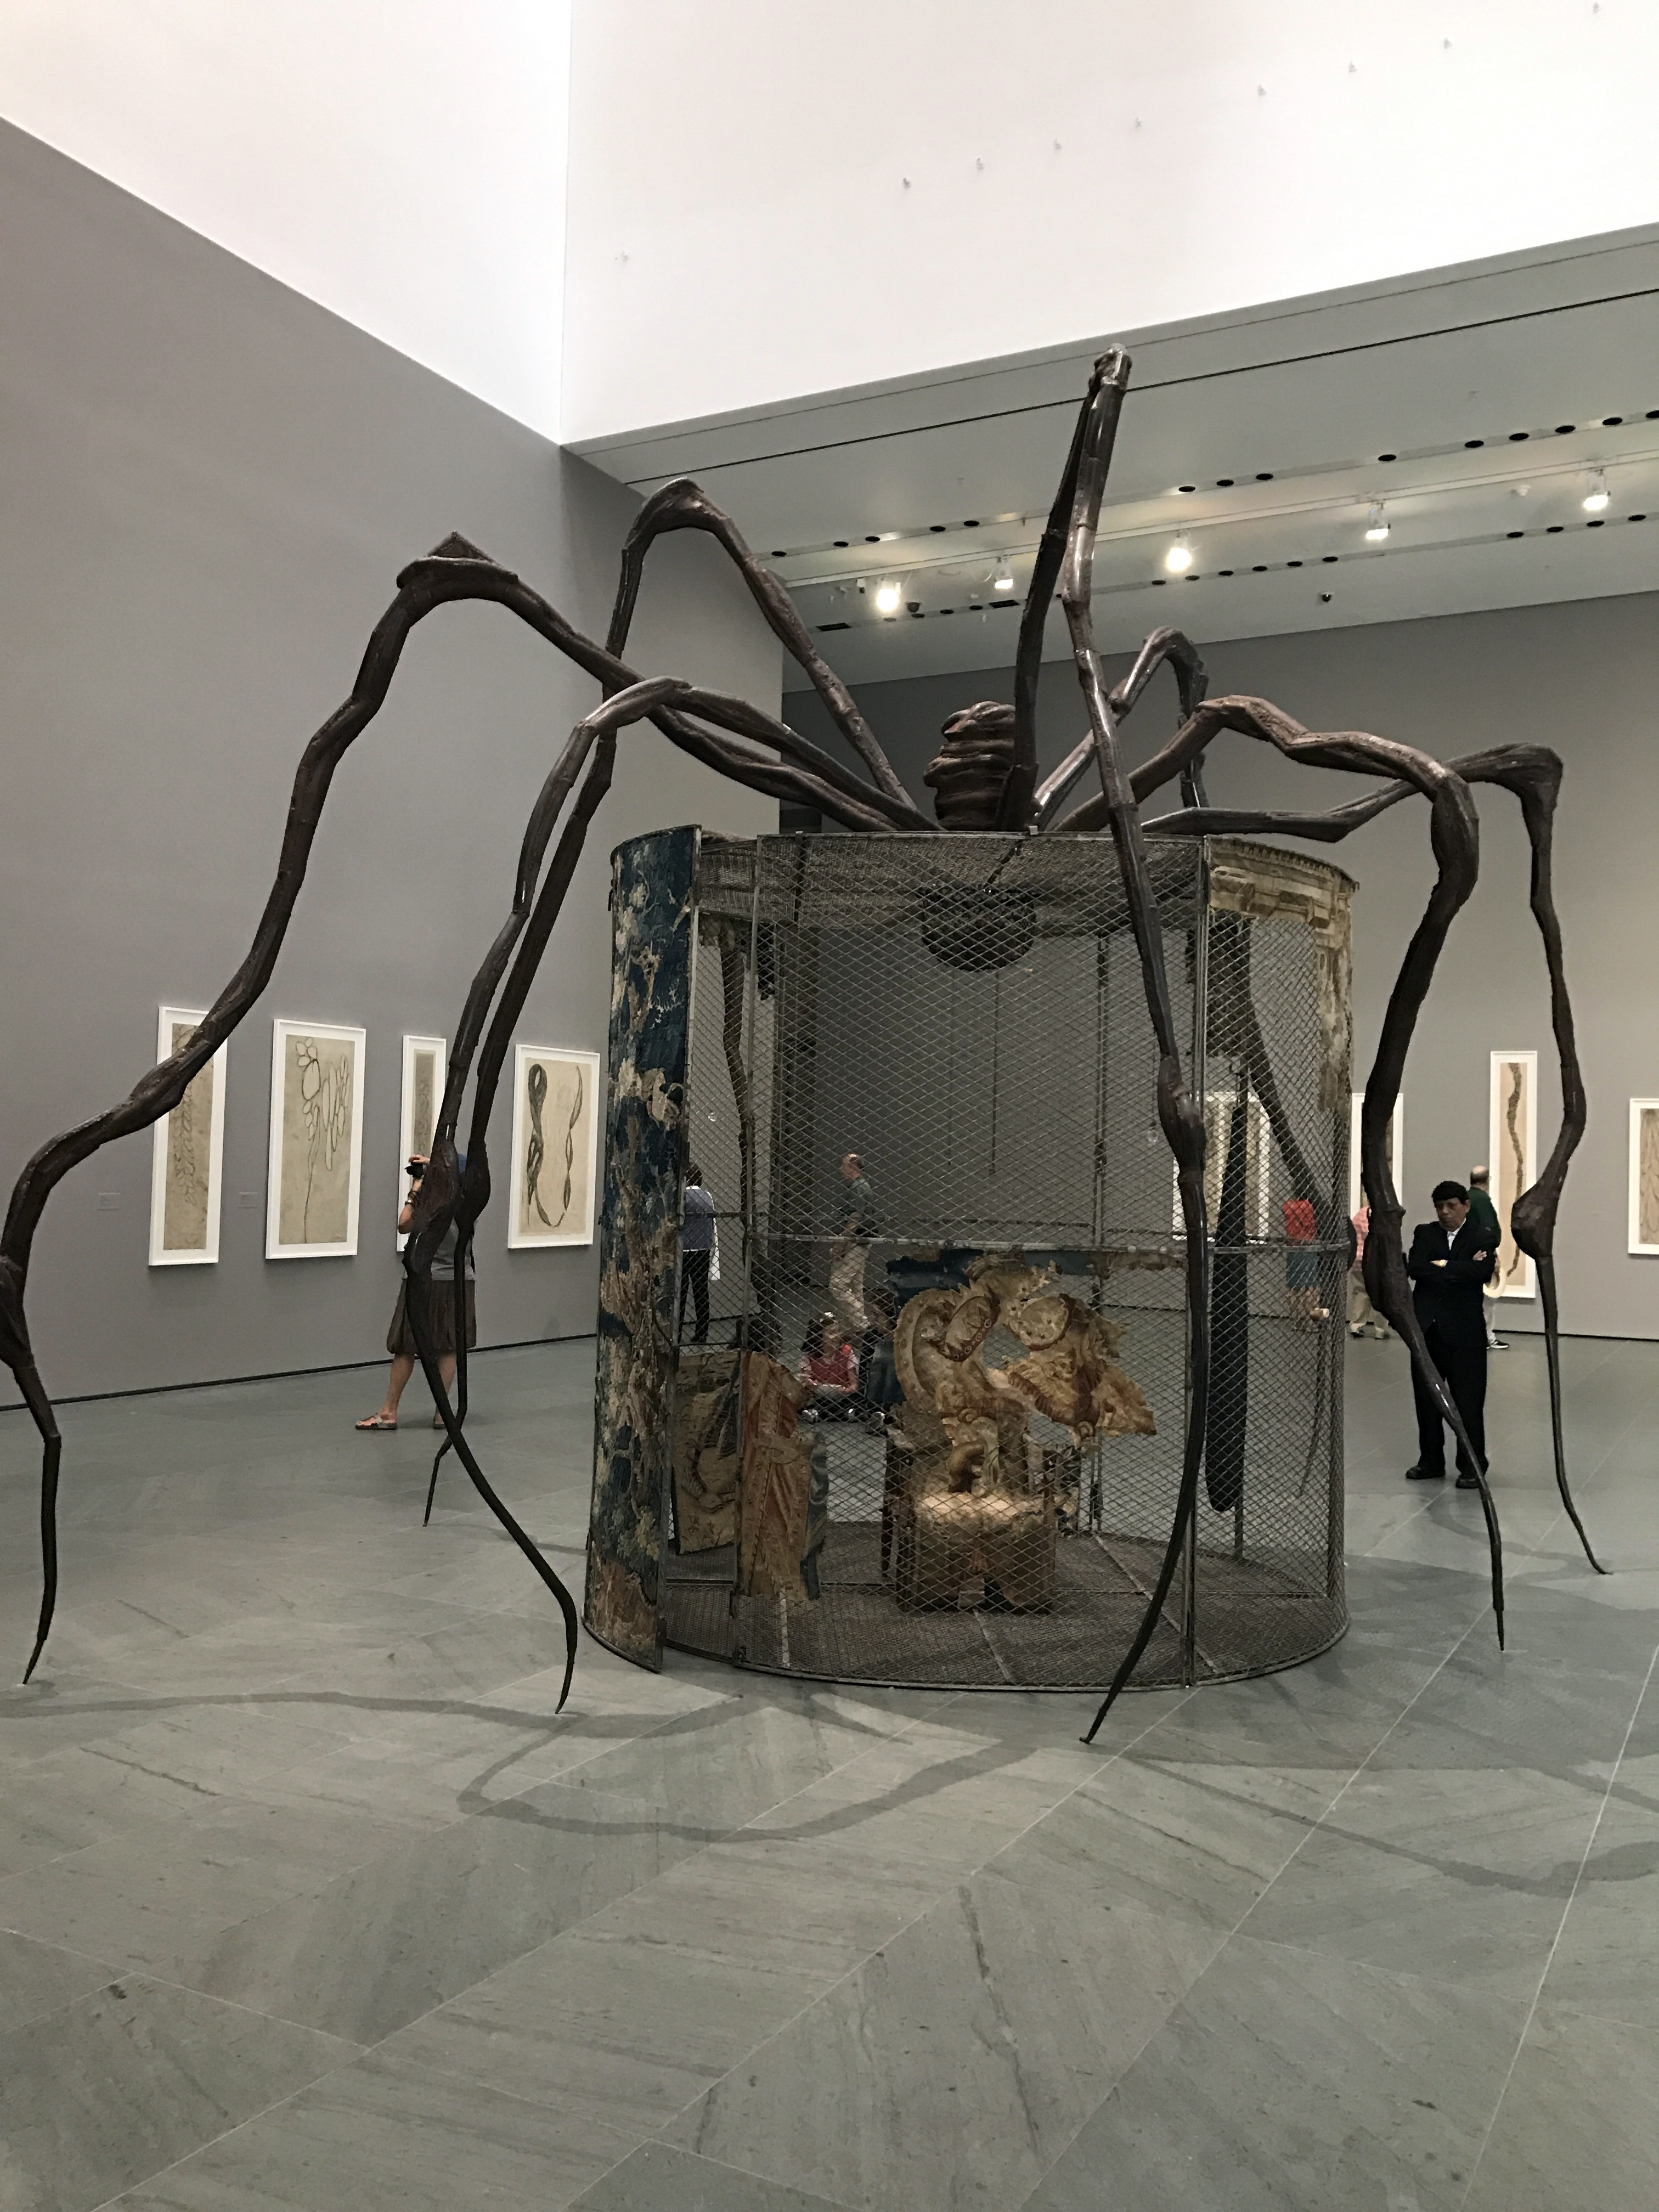 Louise Bourgeois Made Giant Spiders and Wasn't Sorry - Royal Academy of  Arts - Shop, Royal Academy of Arts